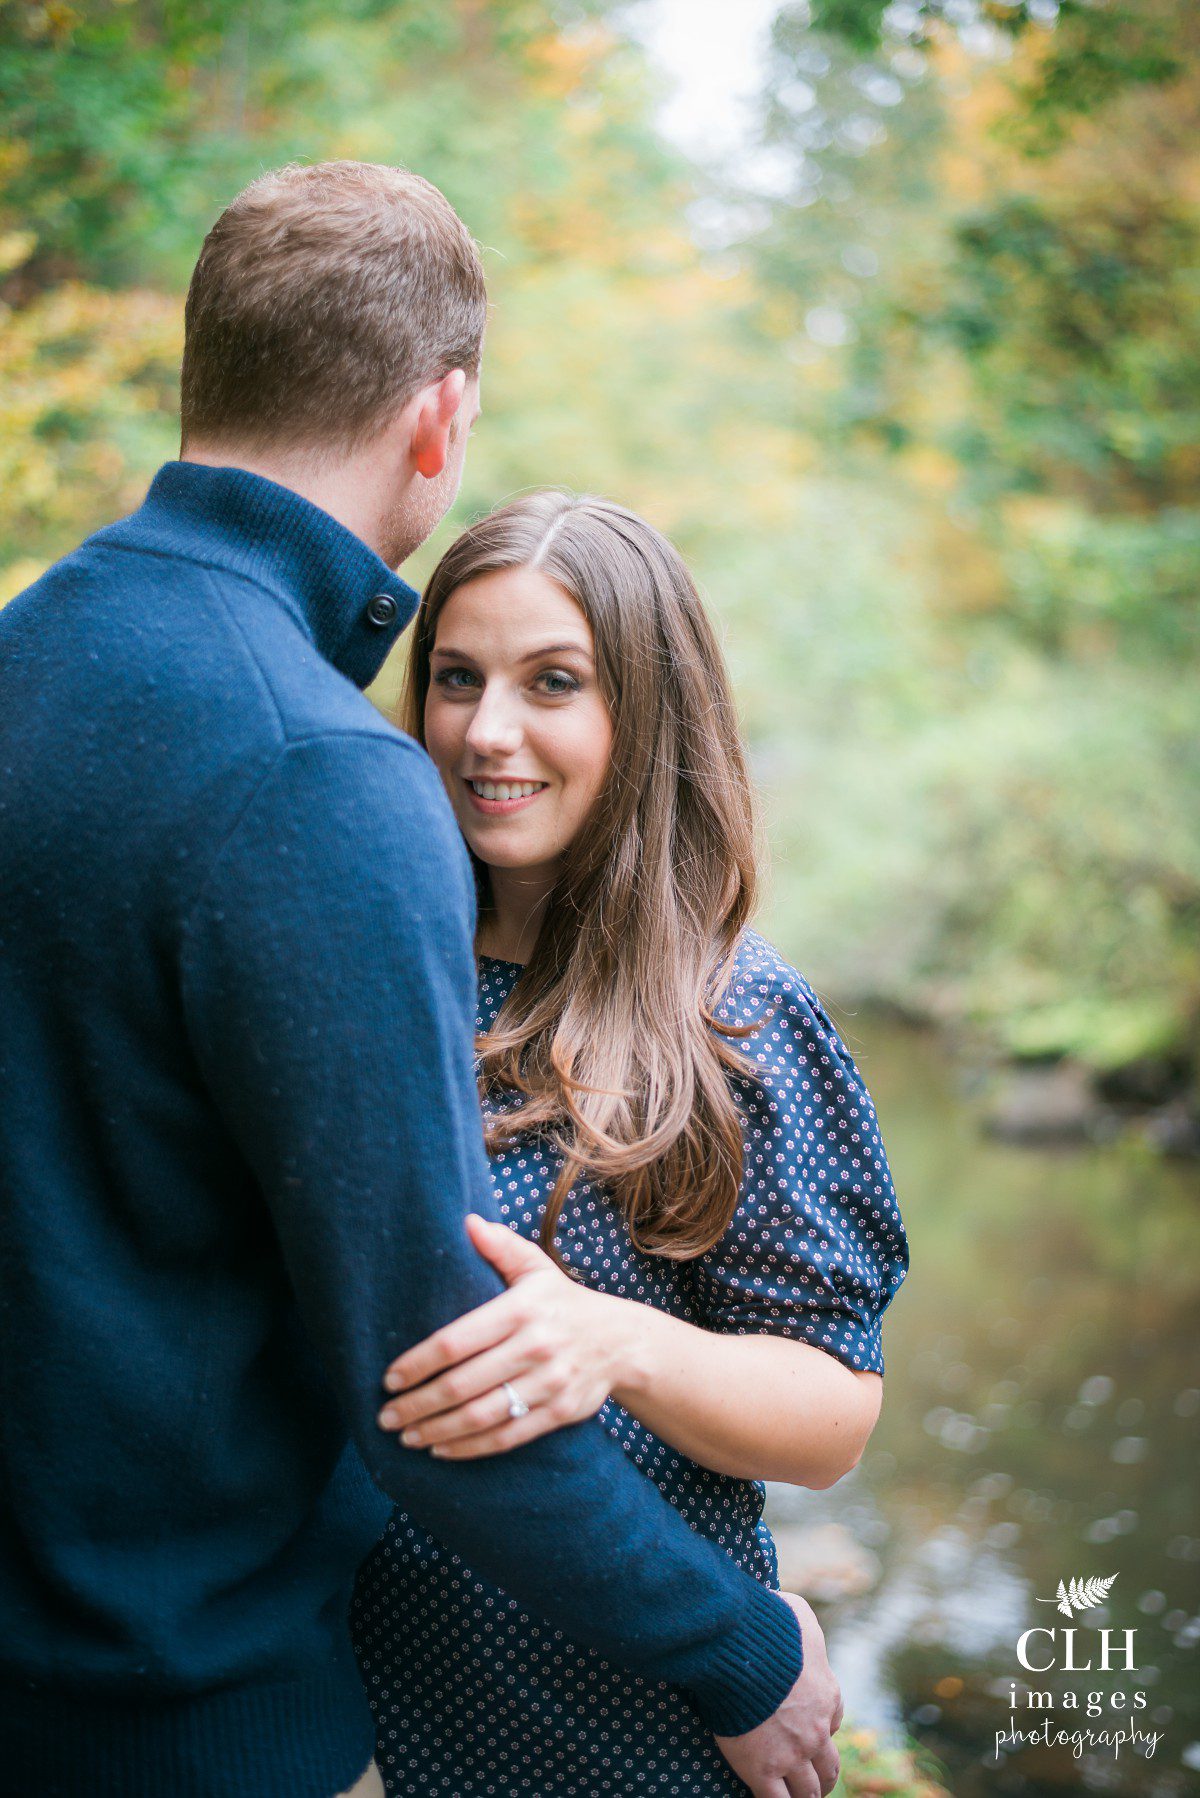 clh-images-photography-saratoga-engagement-photography-capital-district-engagement-photography-saratoga-state-park-photography-amy-and-matt-engagement-photos-12